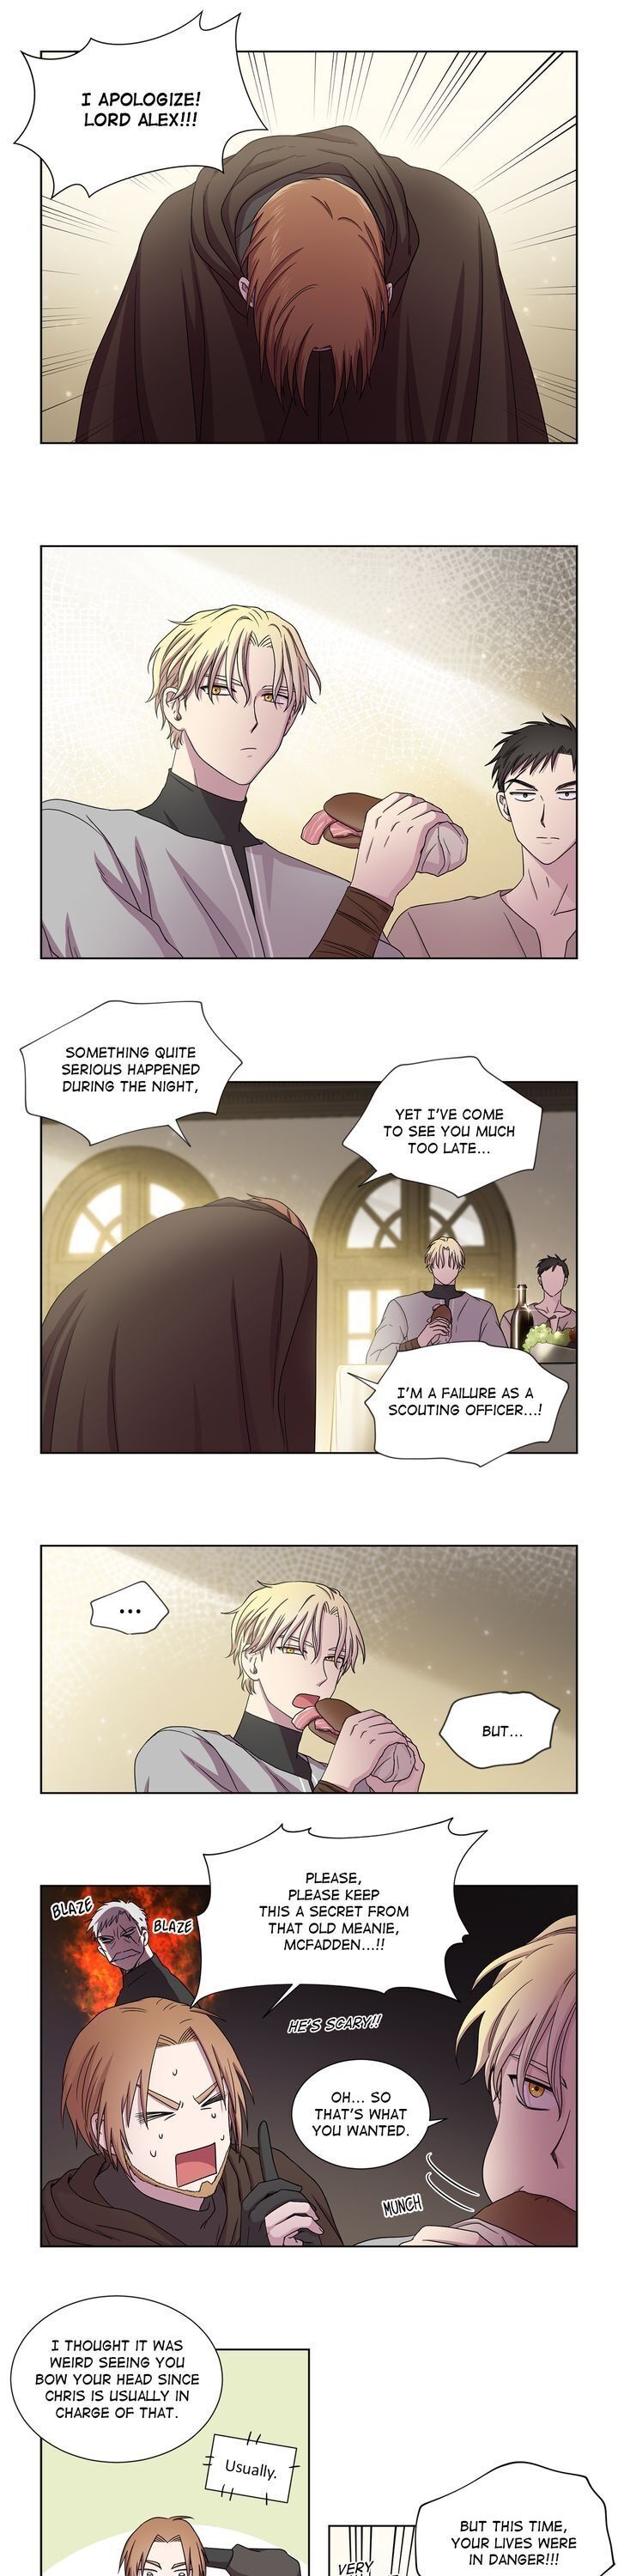 Golden Time - Page 3